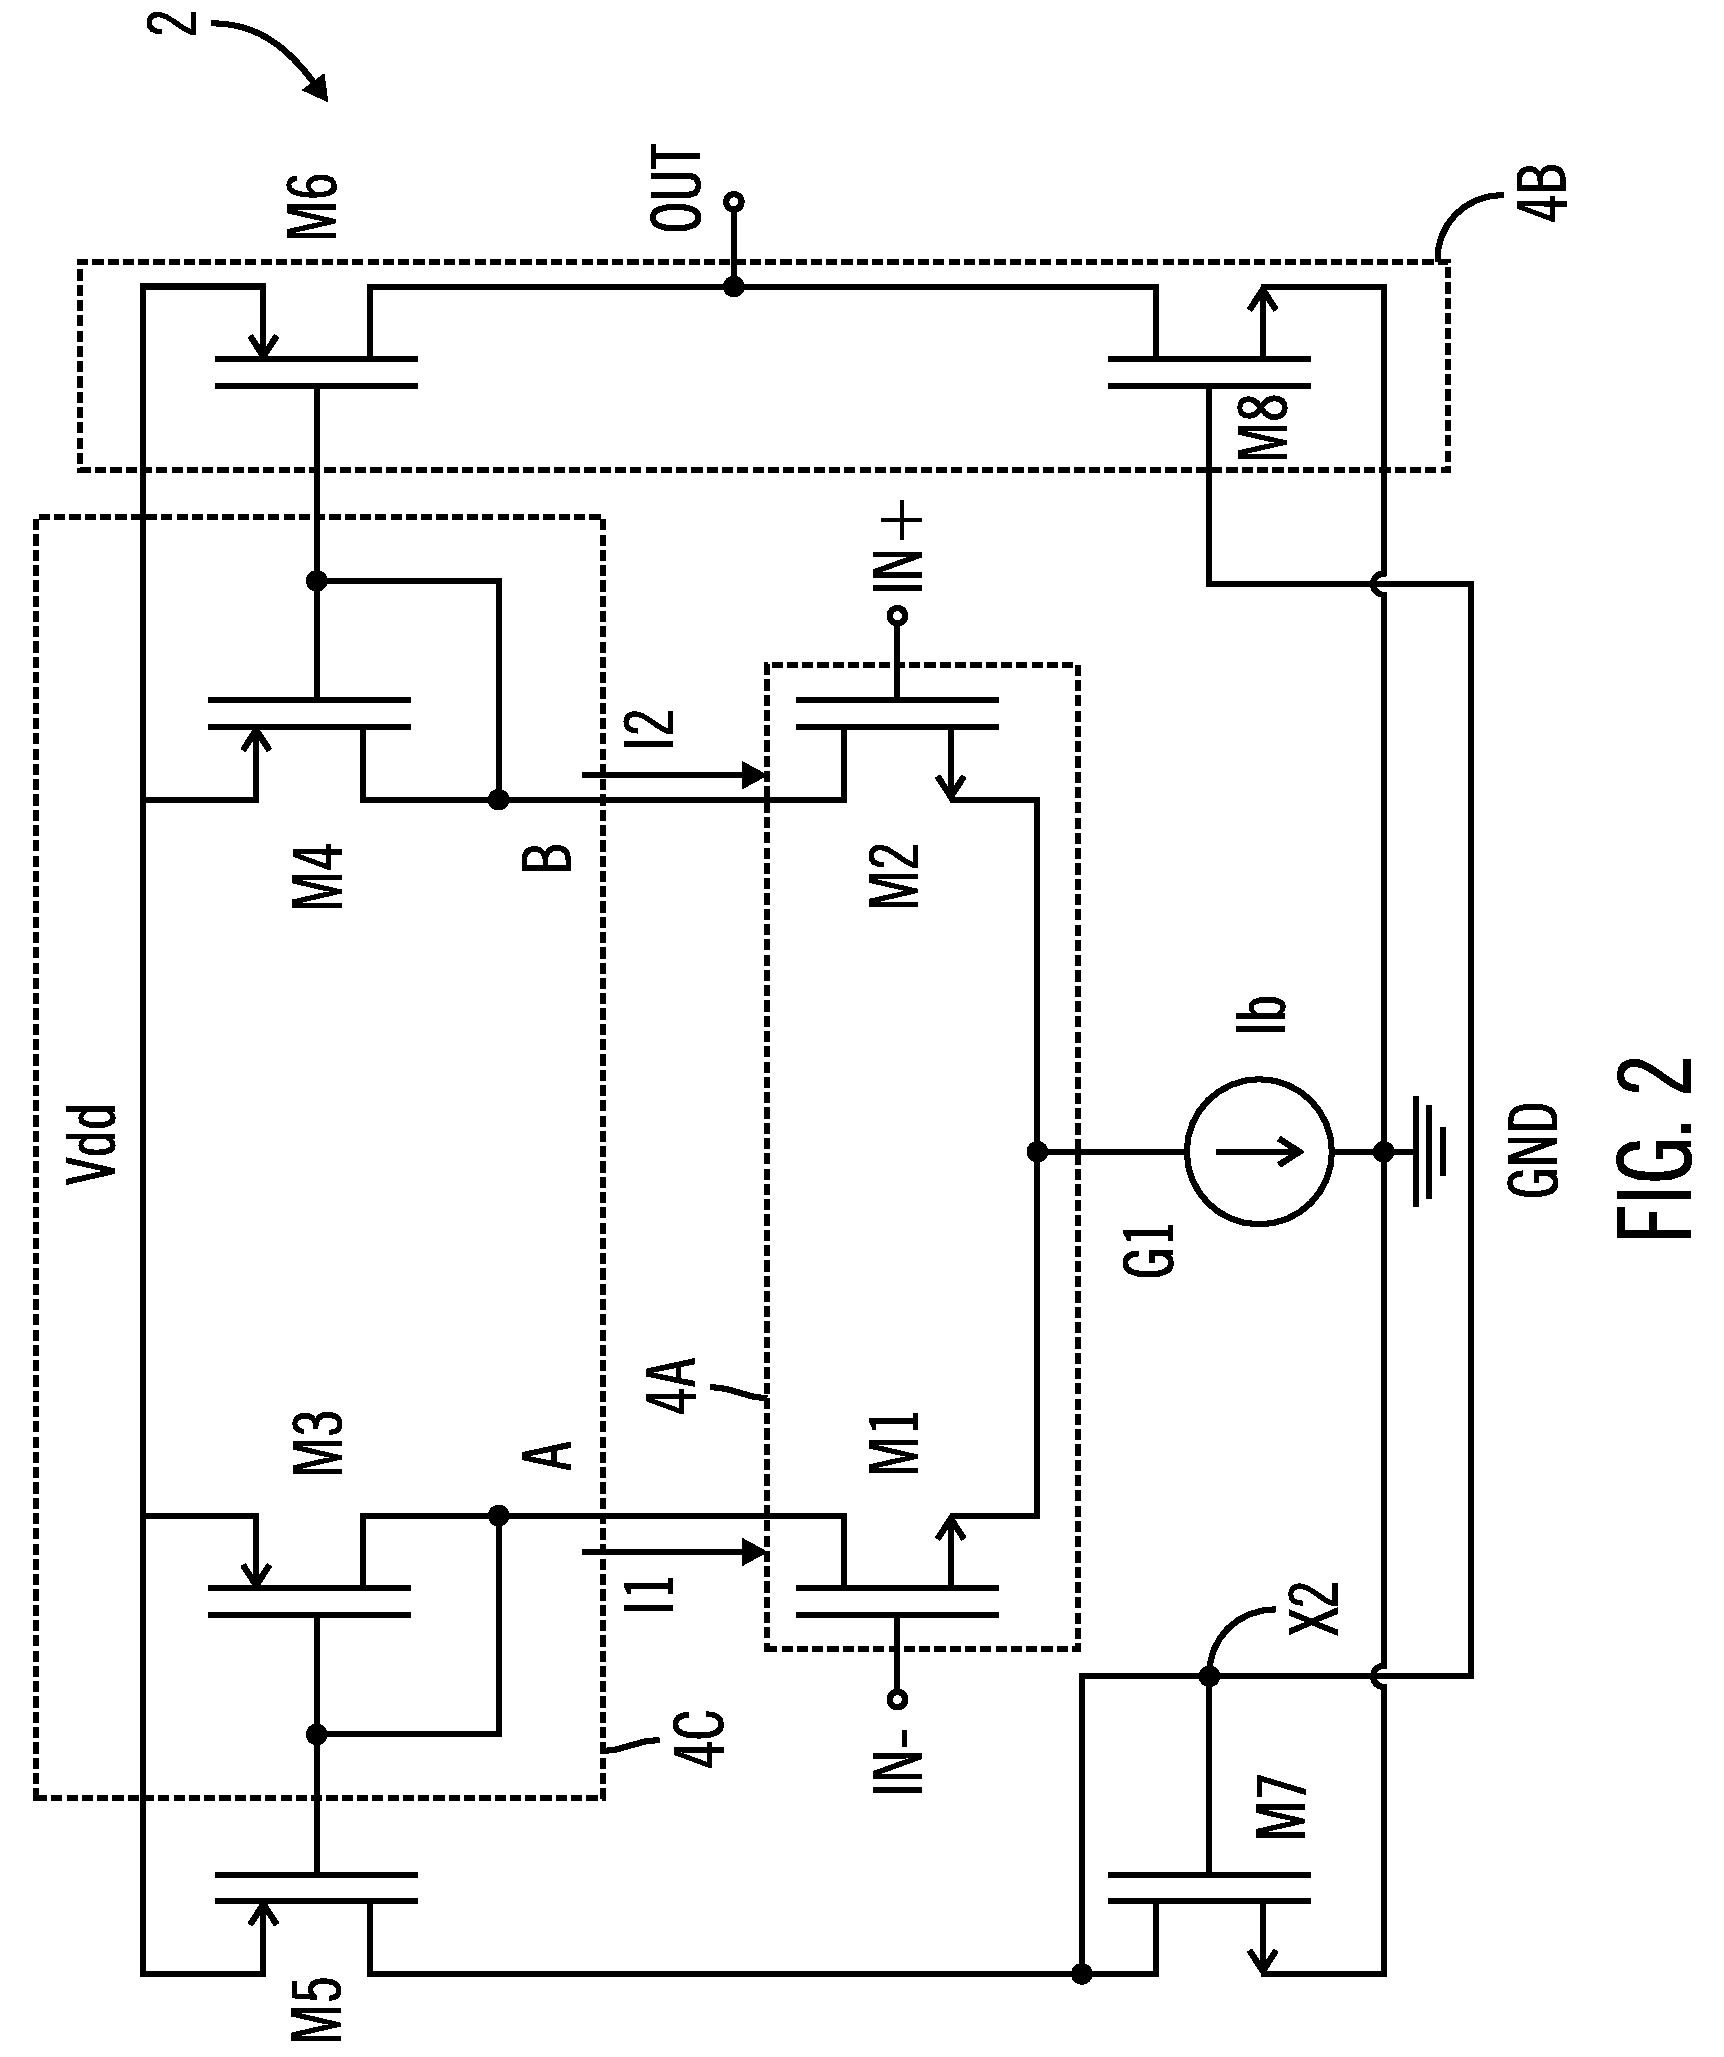 Operational amplifier of class AB